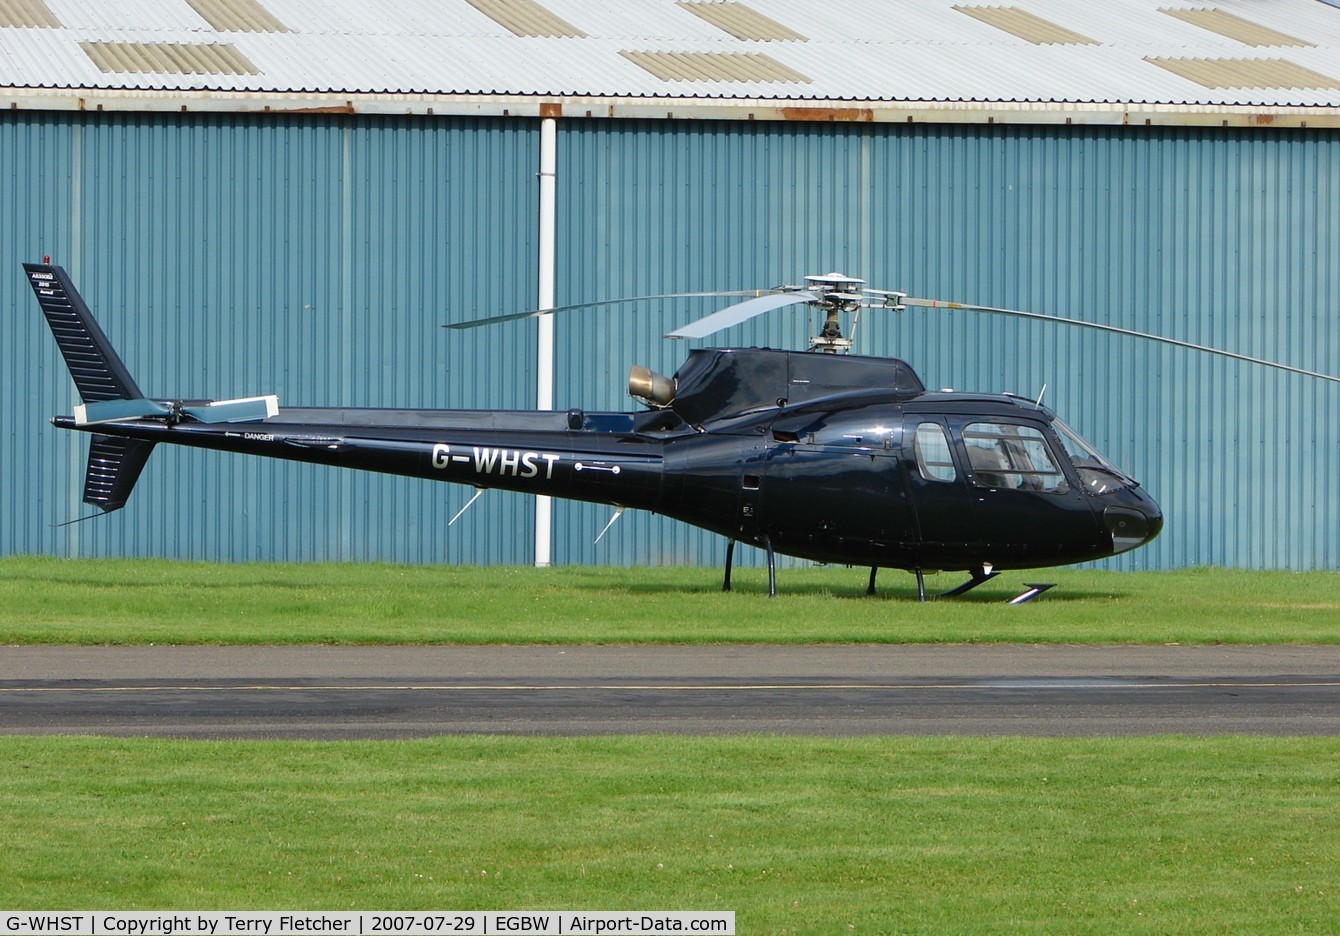 G-WHST, 1996 Eurocopter AS-350B-2 Ecureuil Ecureuil C/N 2915, early Sunday morning at Wellesborne Mountford